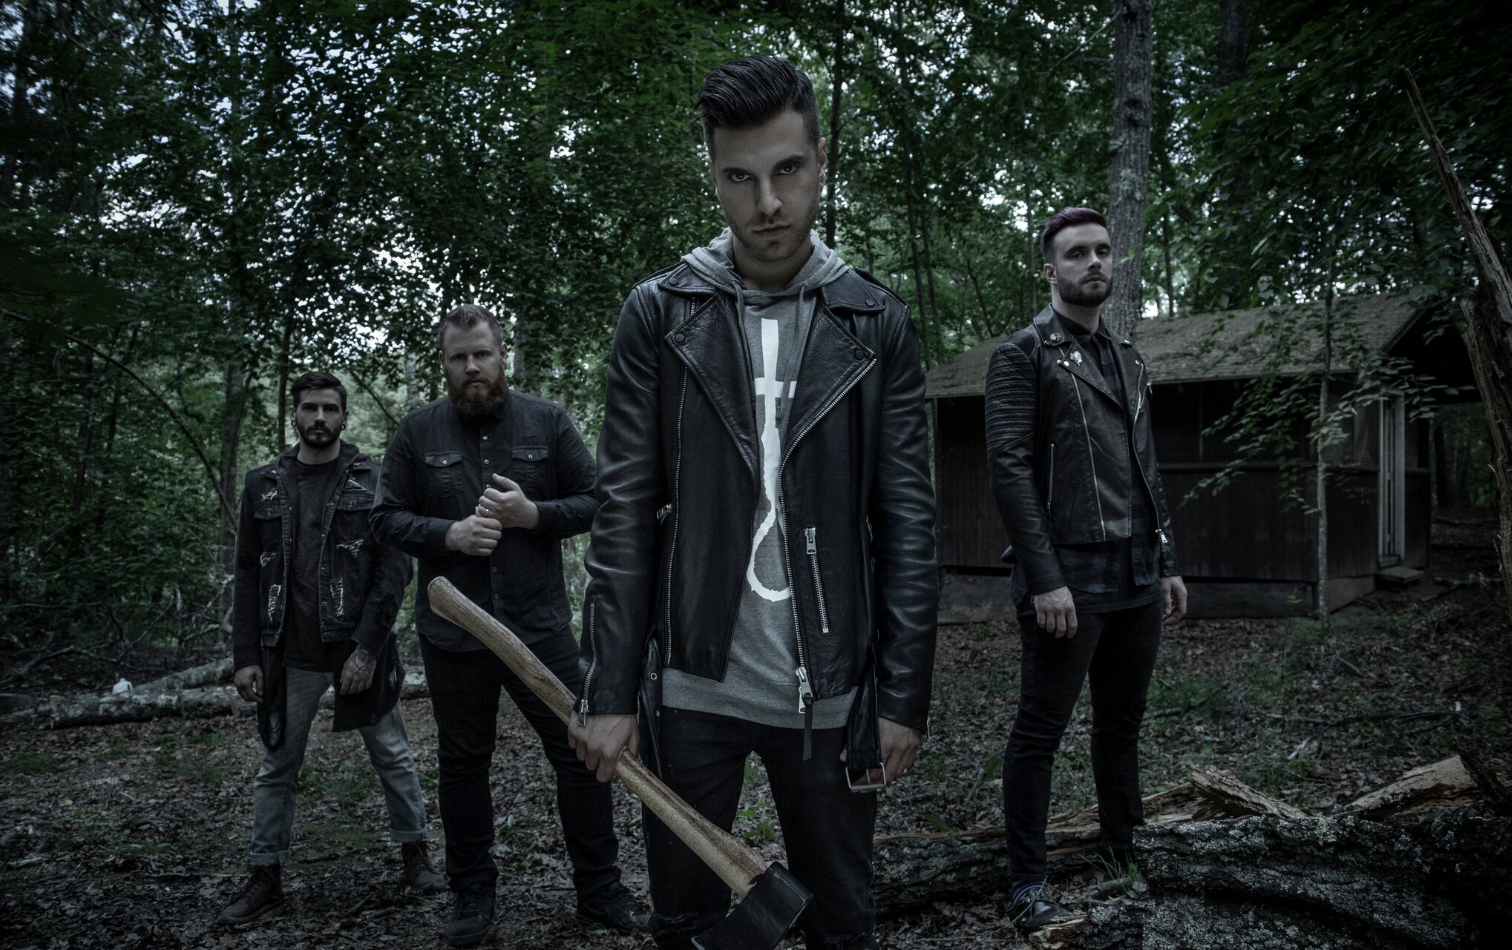 Ice Nine Kills, From Ashes to New announce co-headlining tour